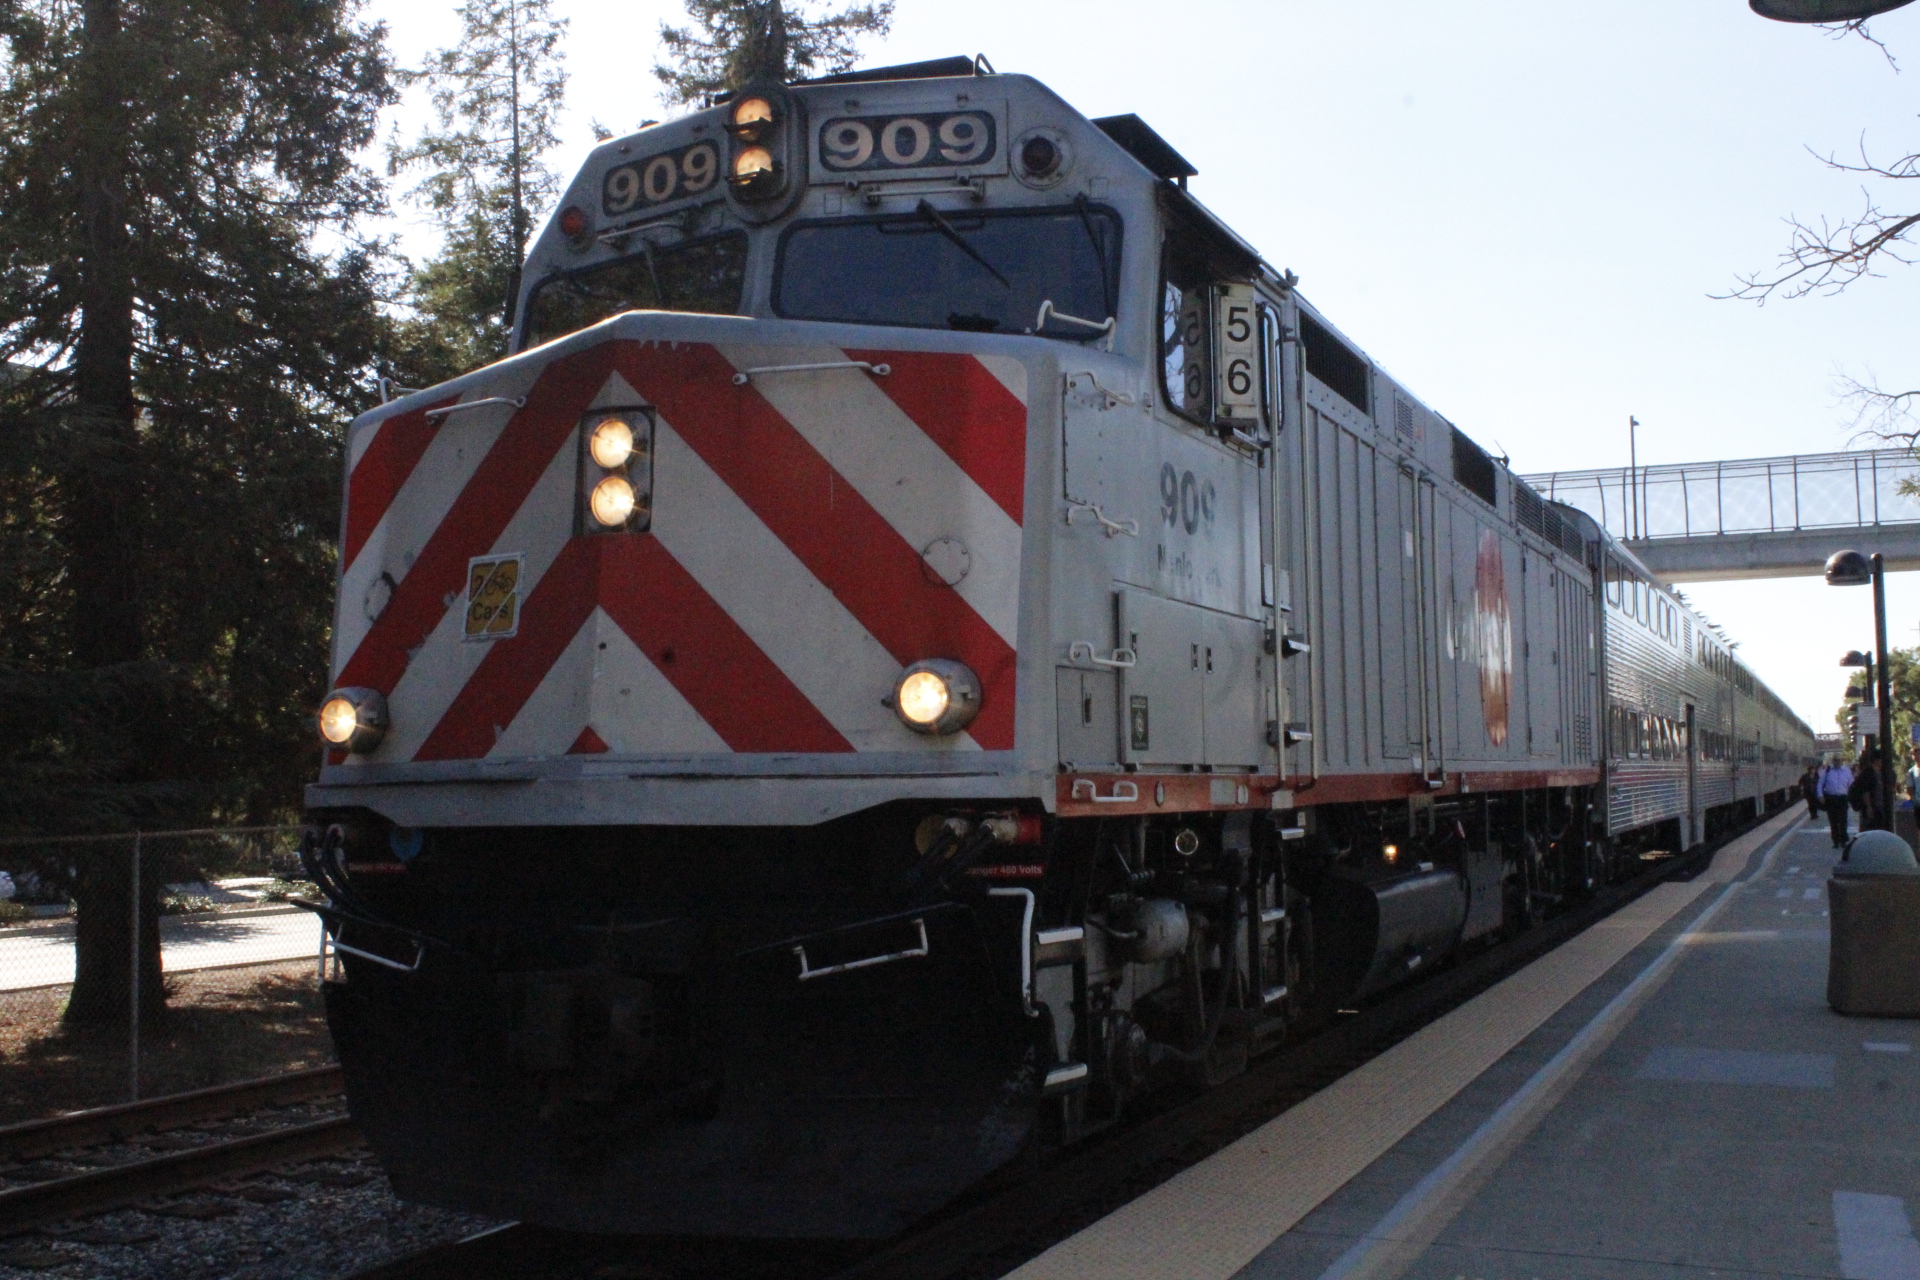 Caltrain locomotive unit 909, Menlo Park, leading a southbound train to Gilroy at Blossom Hill Station